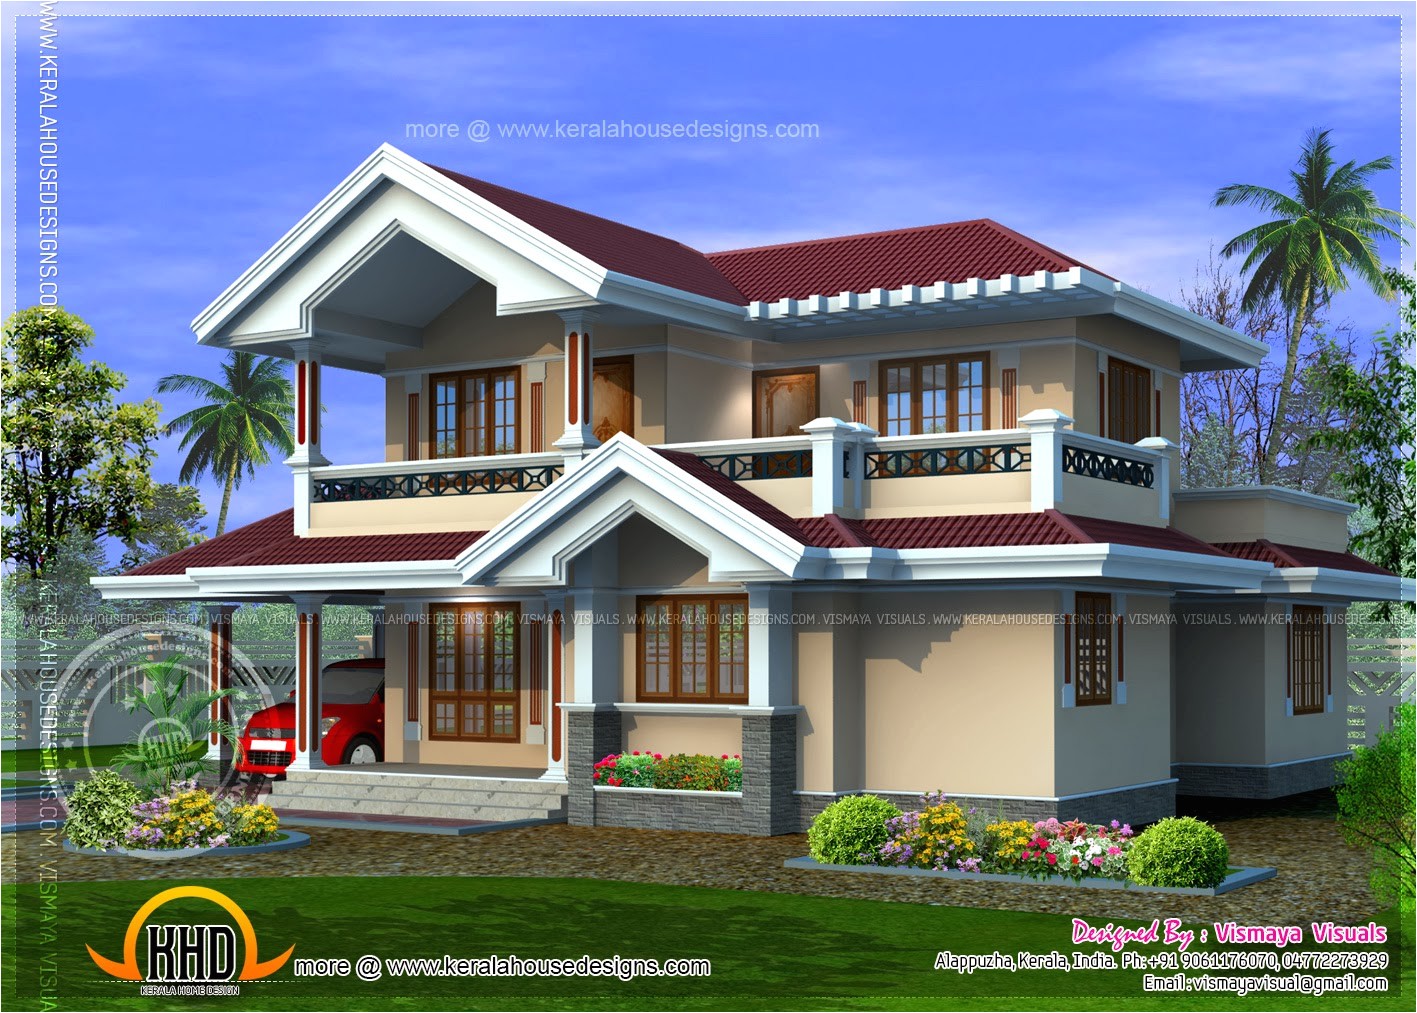 Kerala Style Home Design Plans January 2014 Kerala Home Design and Floor Plans